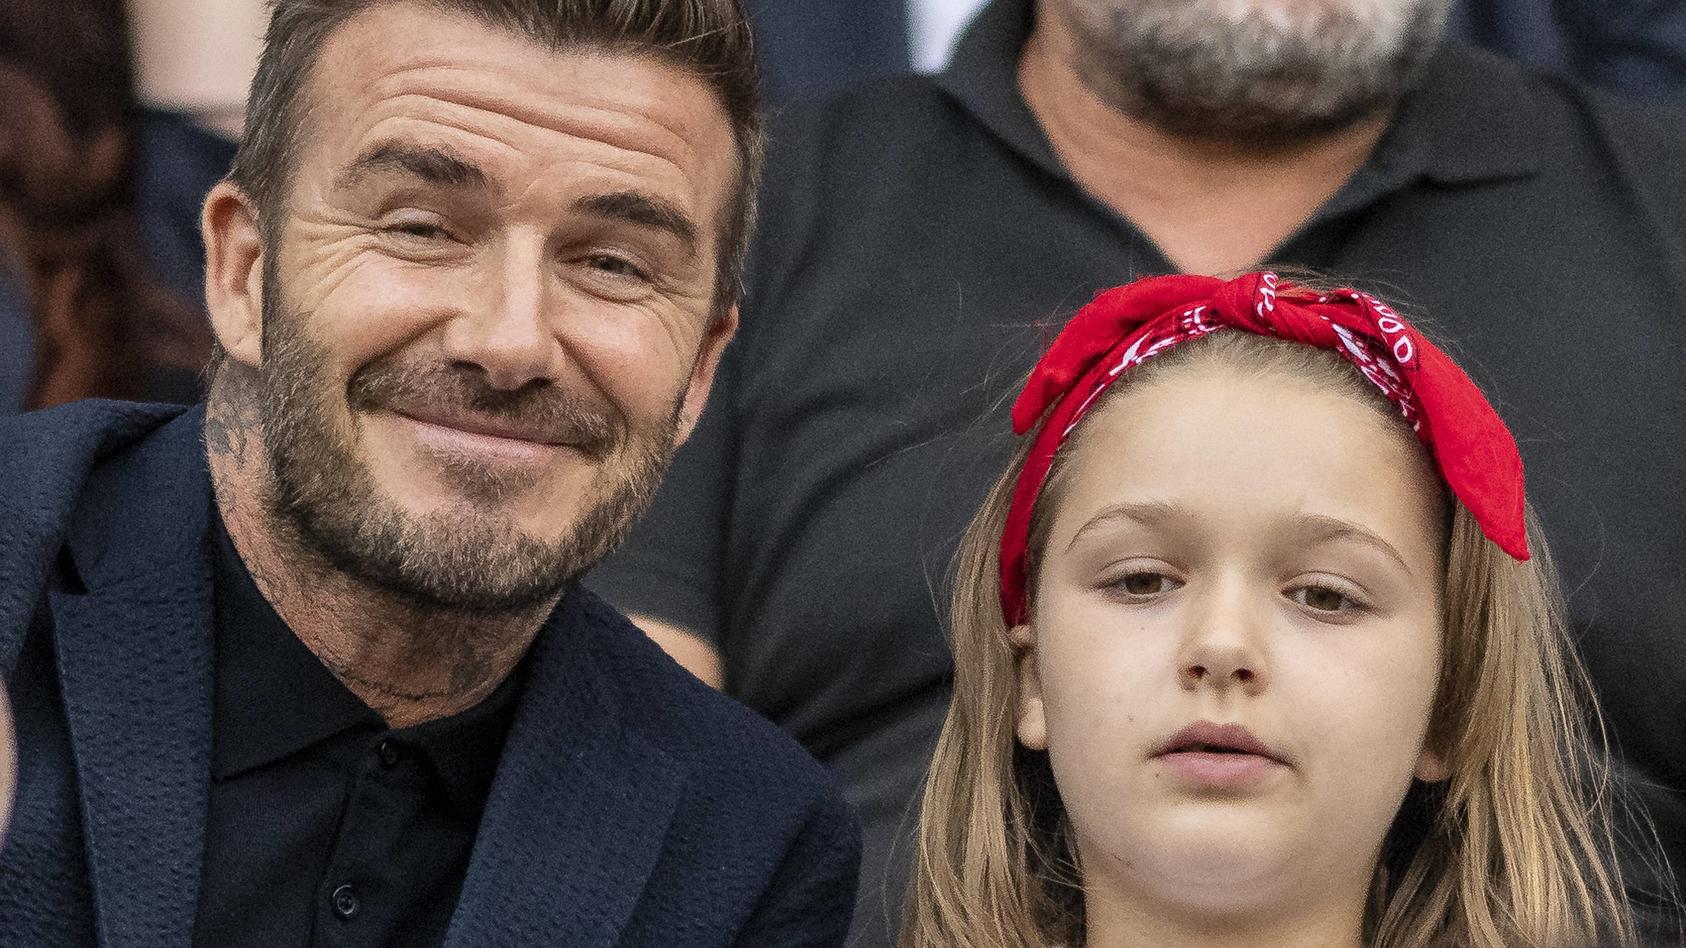 Norway vs England LE HAVRE, SM - 27.06.2019: NORWAY VS ENGLAND - David Beckham and his daughter, Harper, before a match between England and Norway. World Cup Qualification Football. FIFA. Held at the Oceane Stadium in Le Havre, France (Photo: Richard